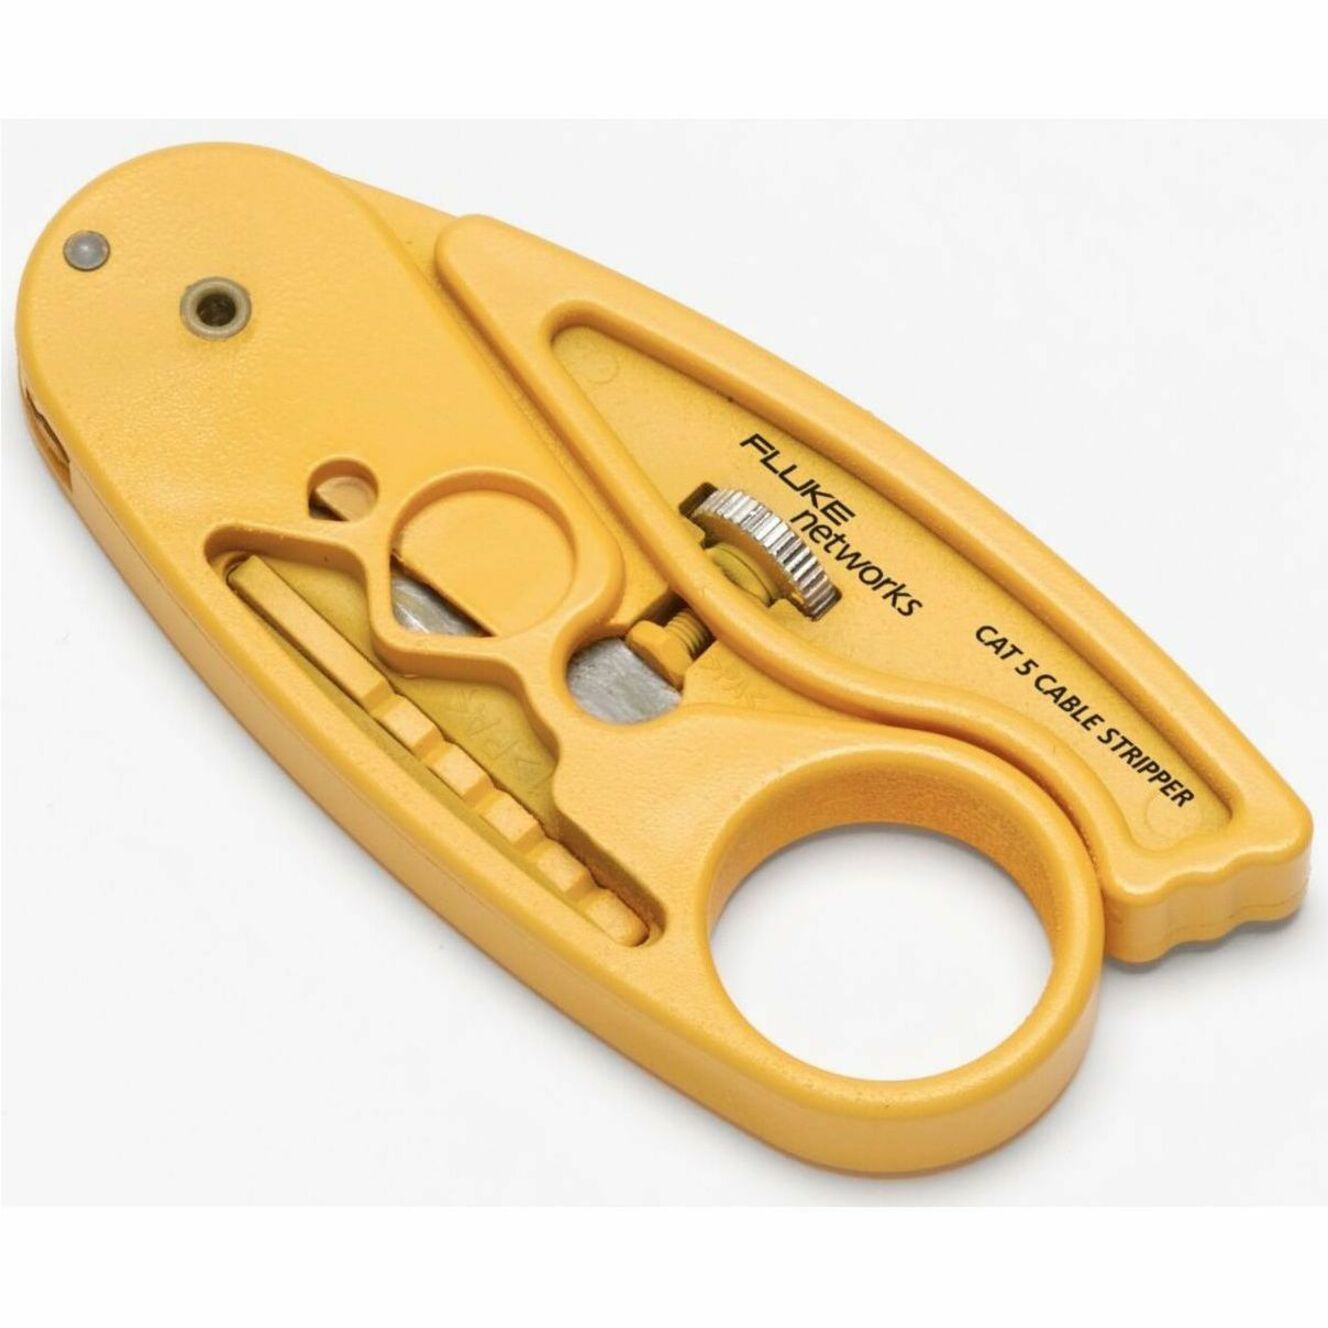 Fluke Networks 11230002 Round Cable Stripper, Cutting Tool for Stripping and Cutting